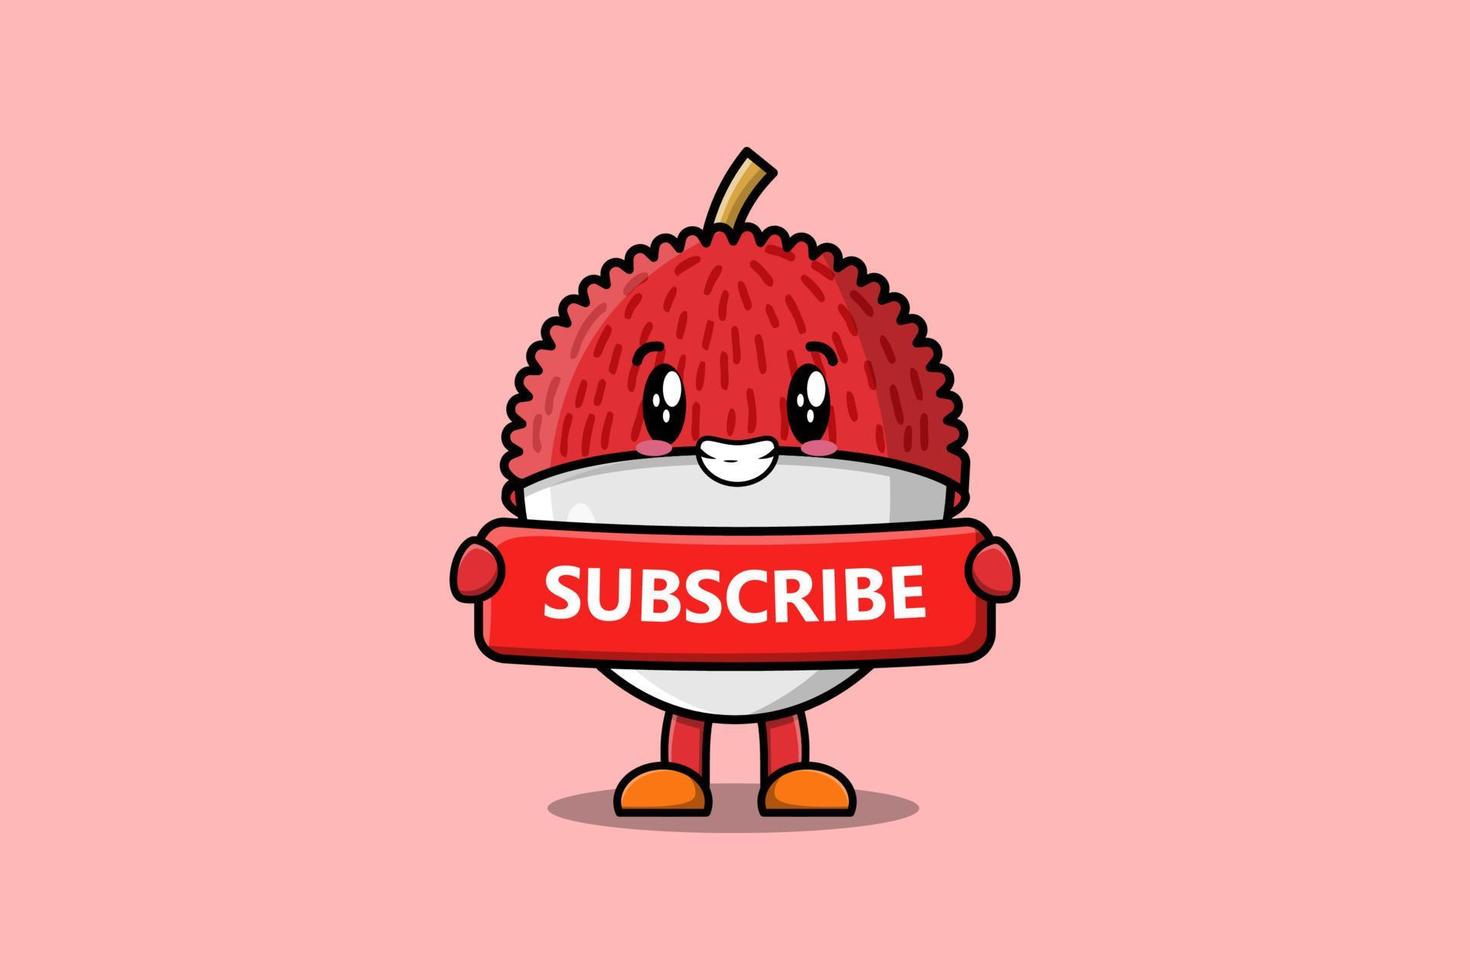 Cute cartoon Lychee holding red subscribe board vector